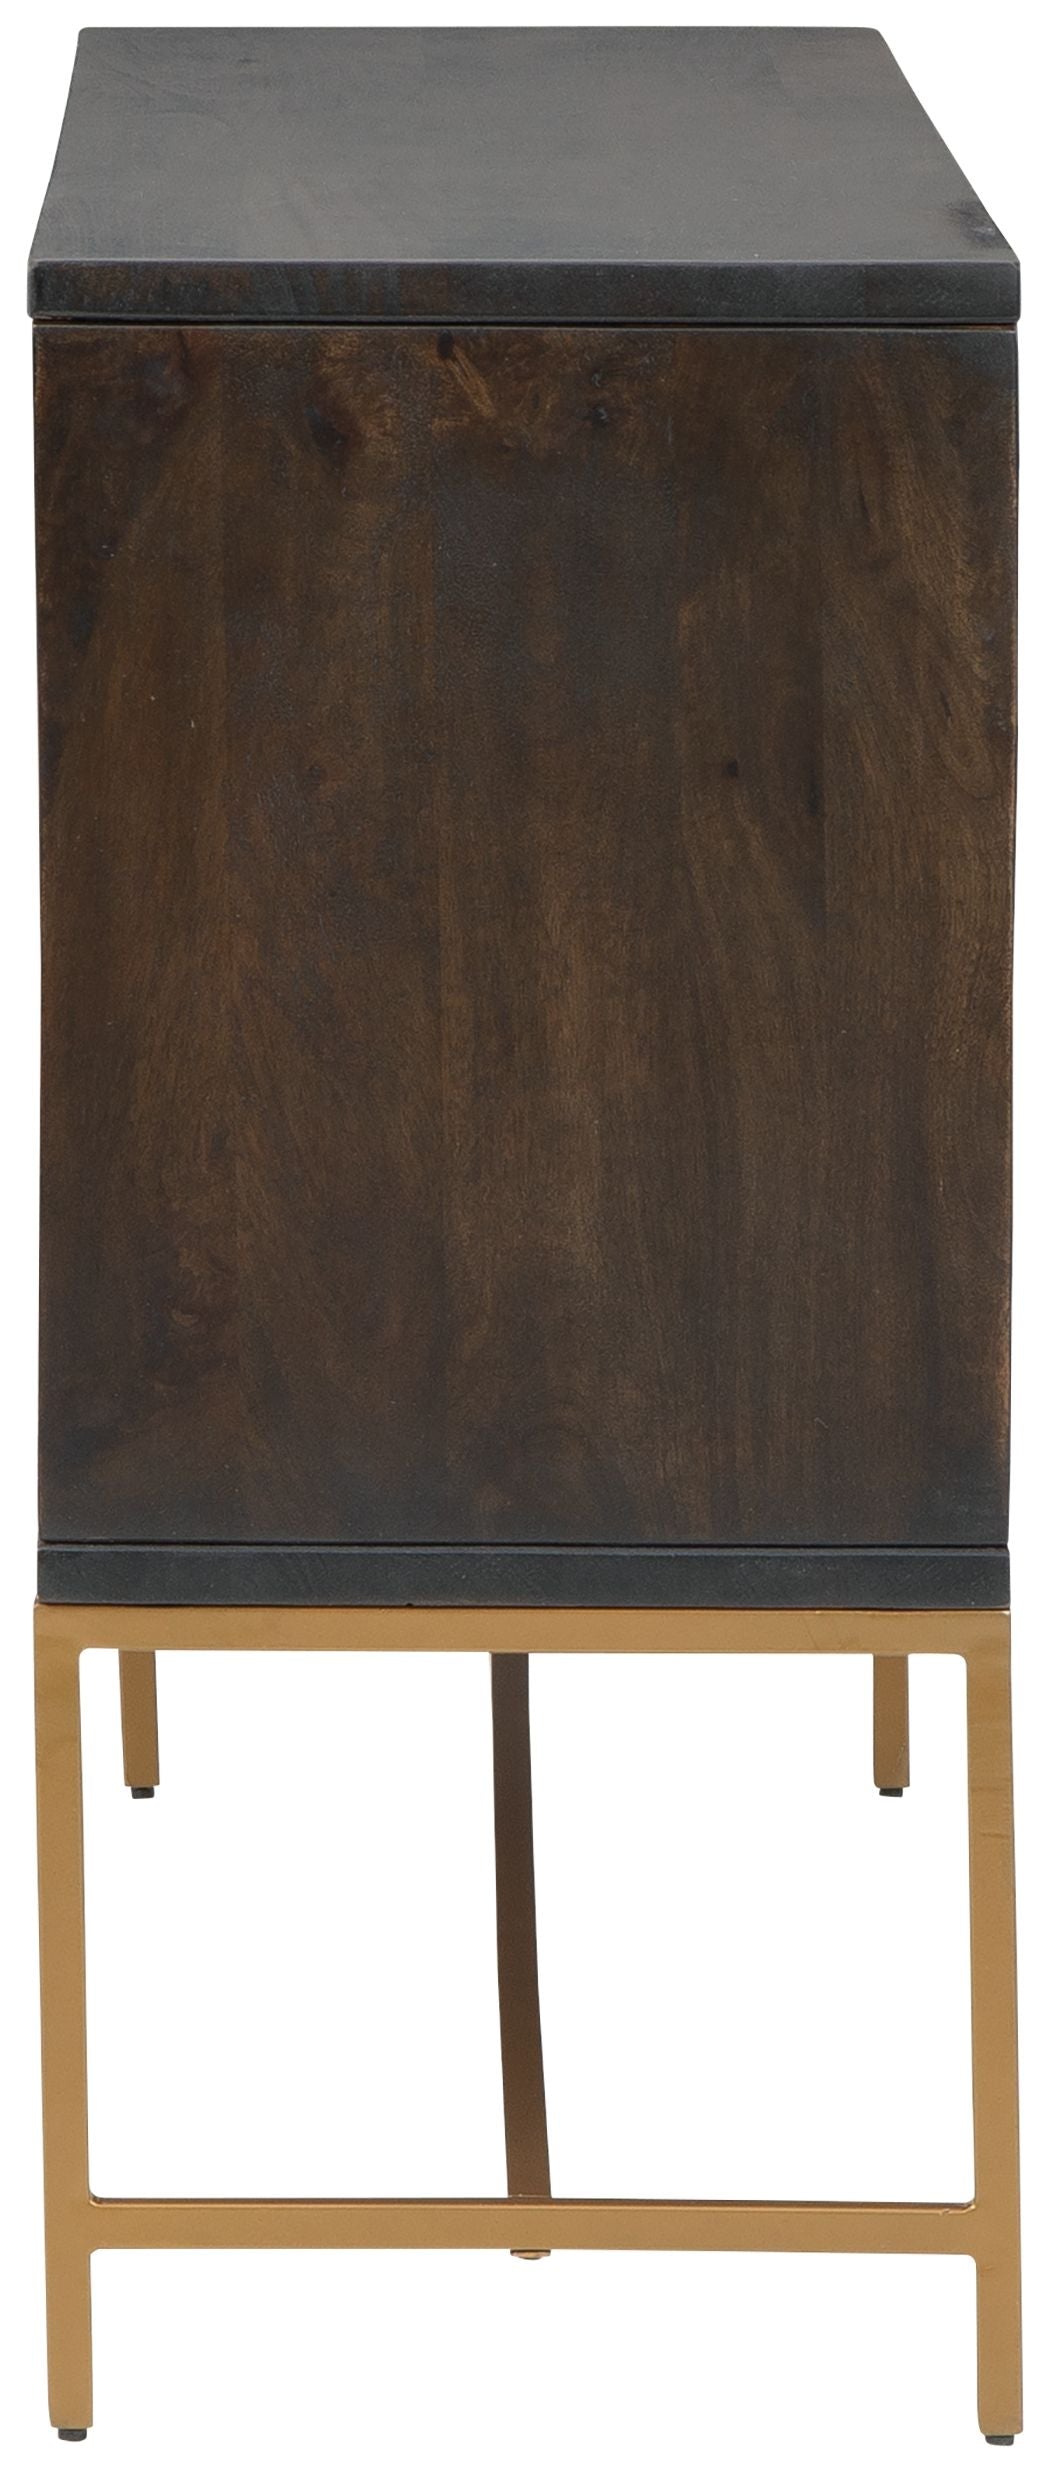 Elinmore - Brown / Gold Finish - Accent Cabinet - Tony's Home Furnishings